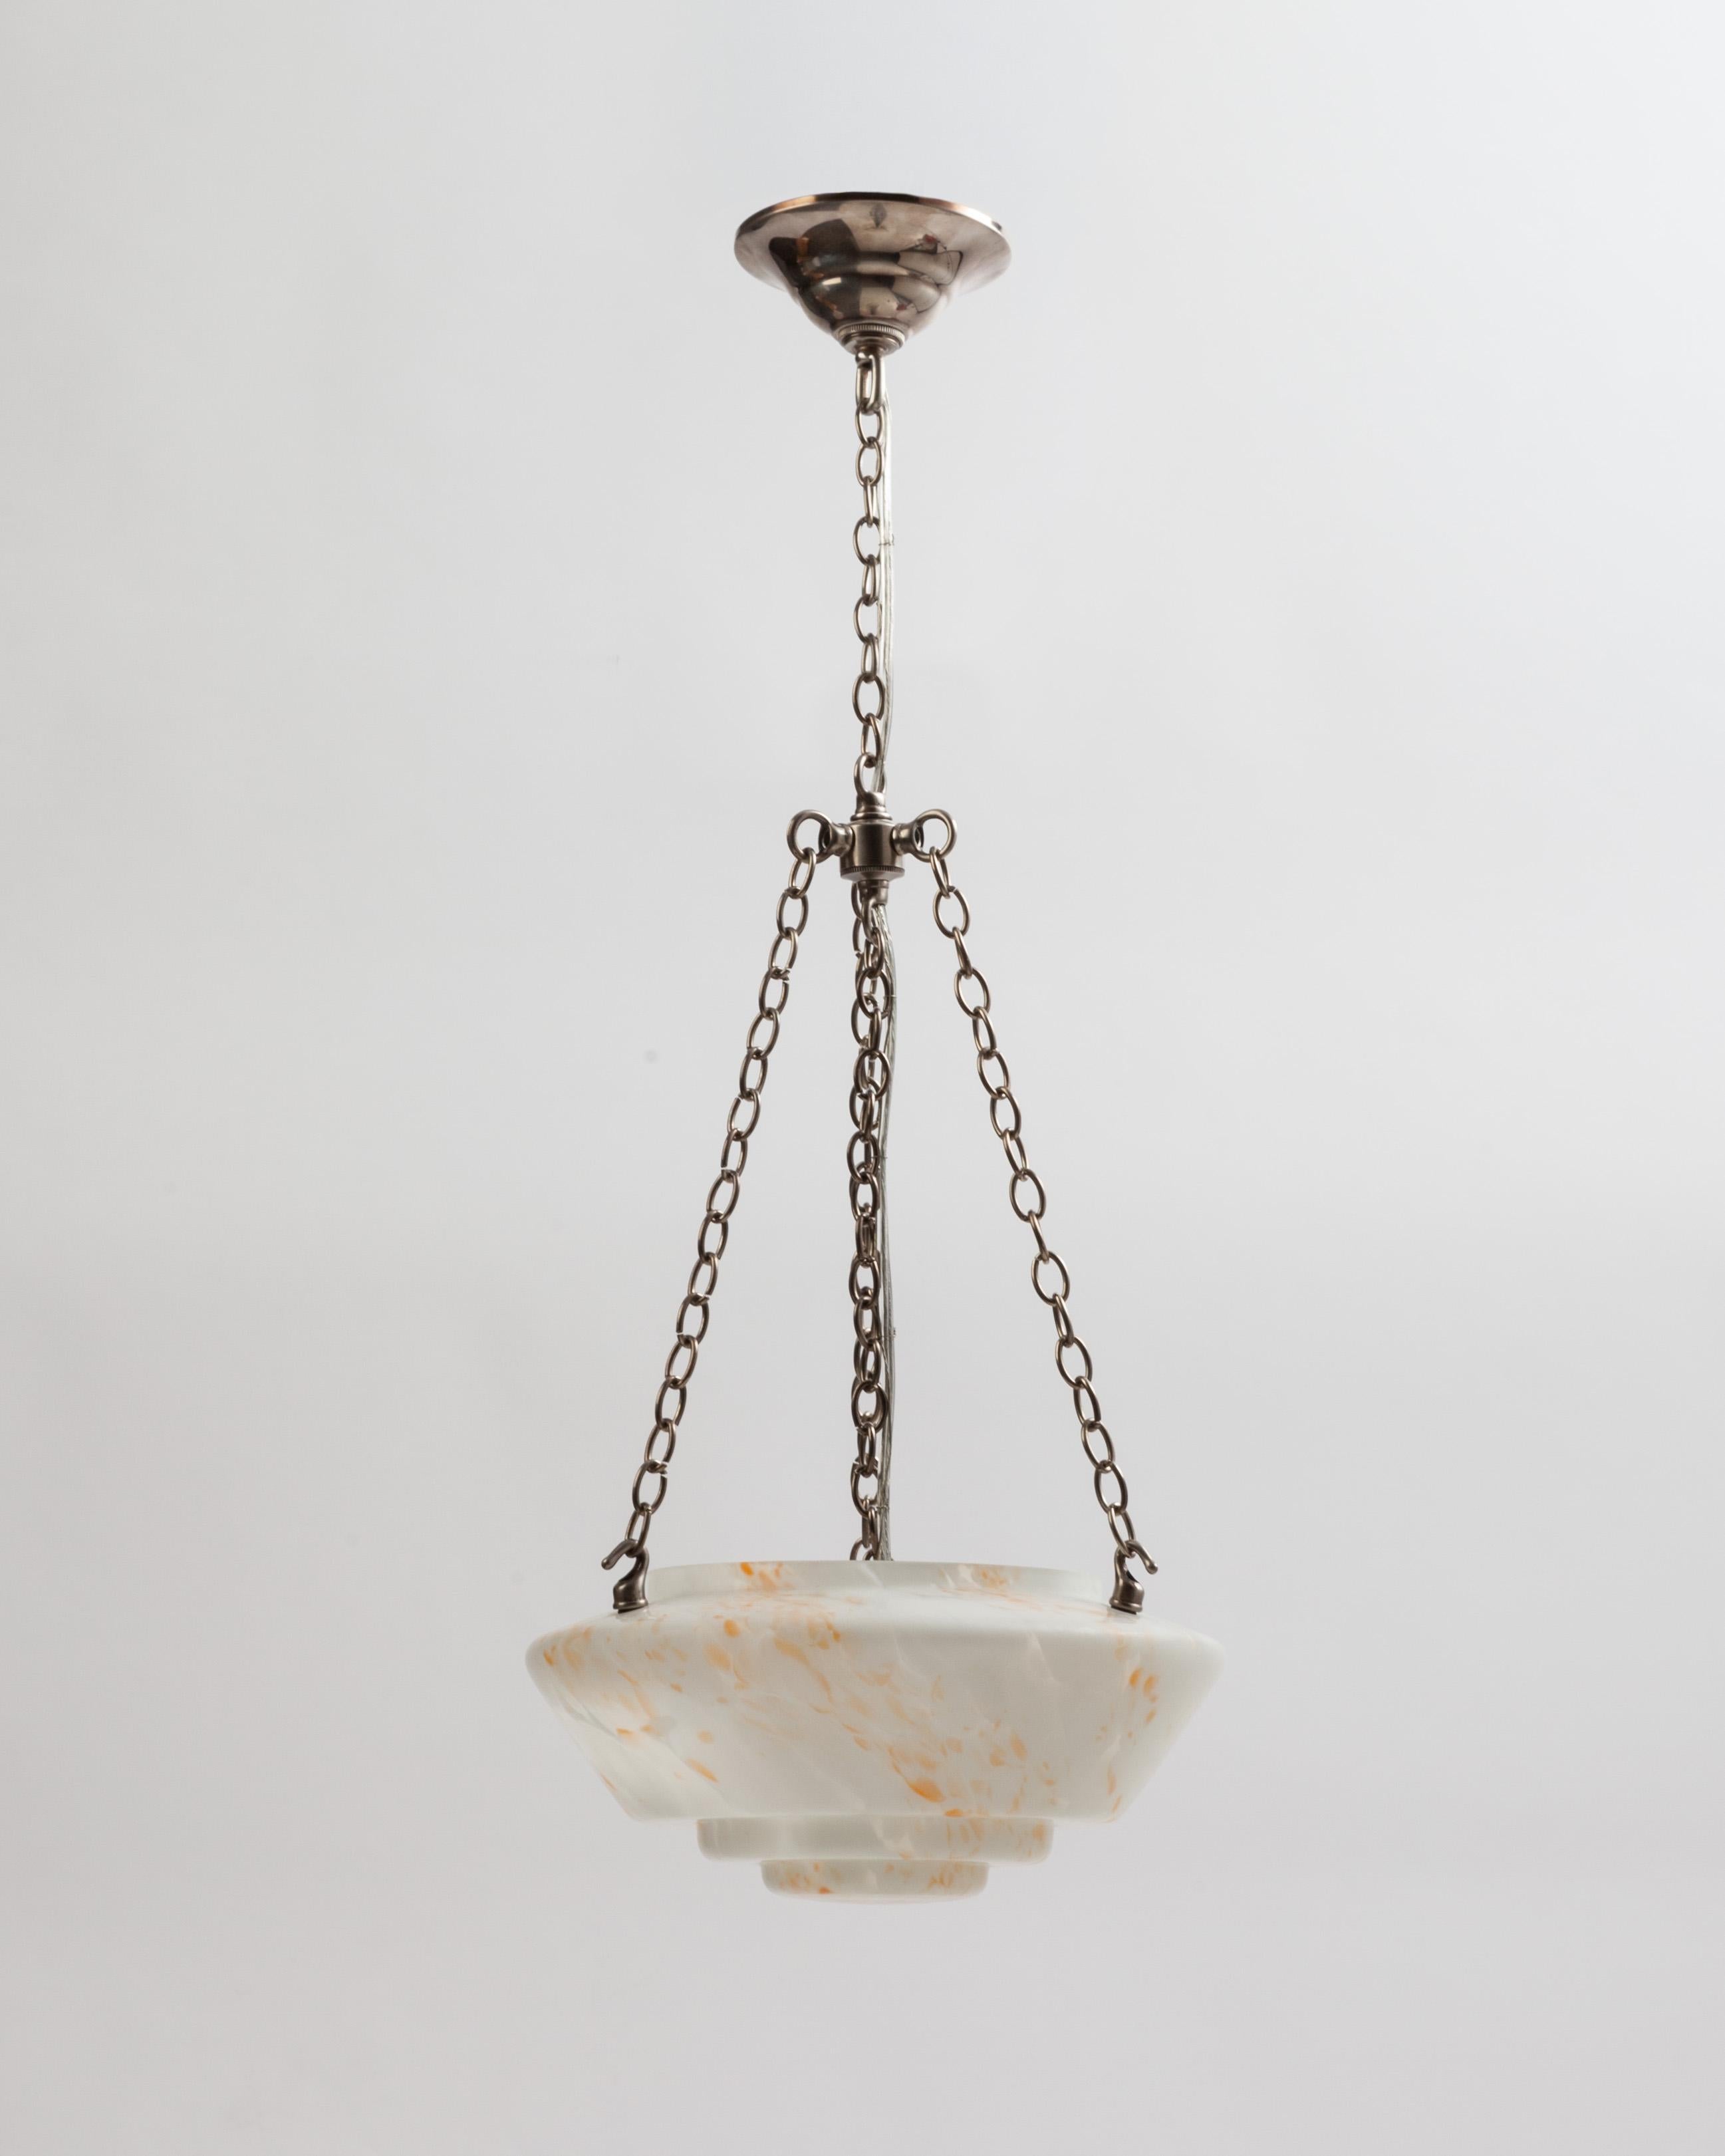 AHL3803
A vintage end-of-day glass chandelier with a step profile and a satin surface on the lens. Suspended with nickel metalwork custom made in the Remains Lighting workshop. Due to the antique nature of this fixture, there may be some nicks or